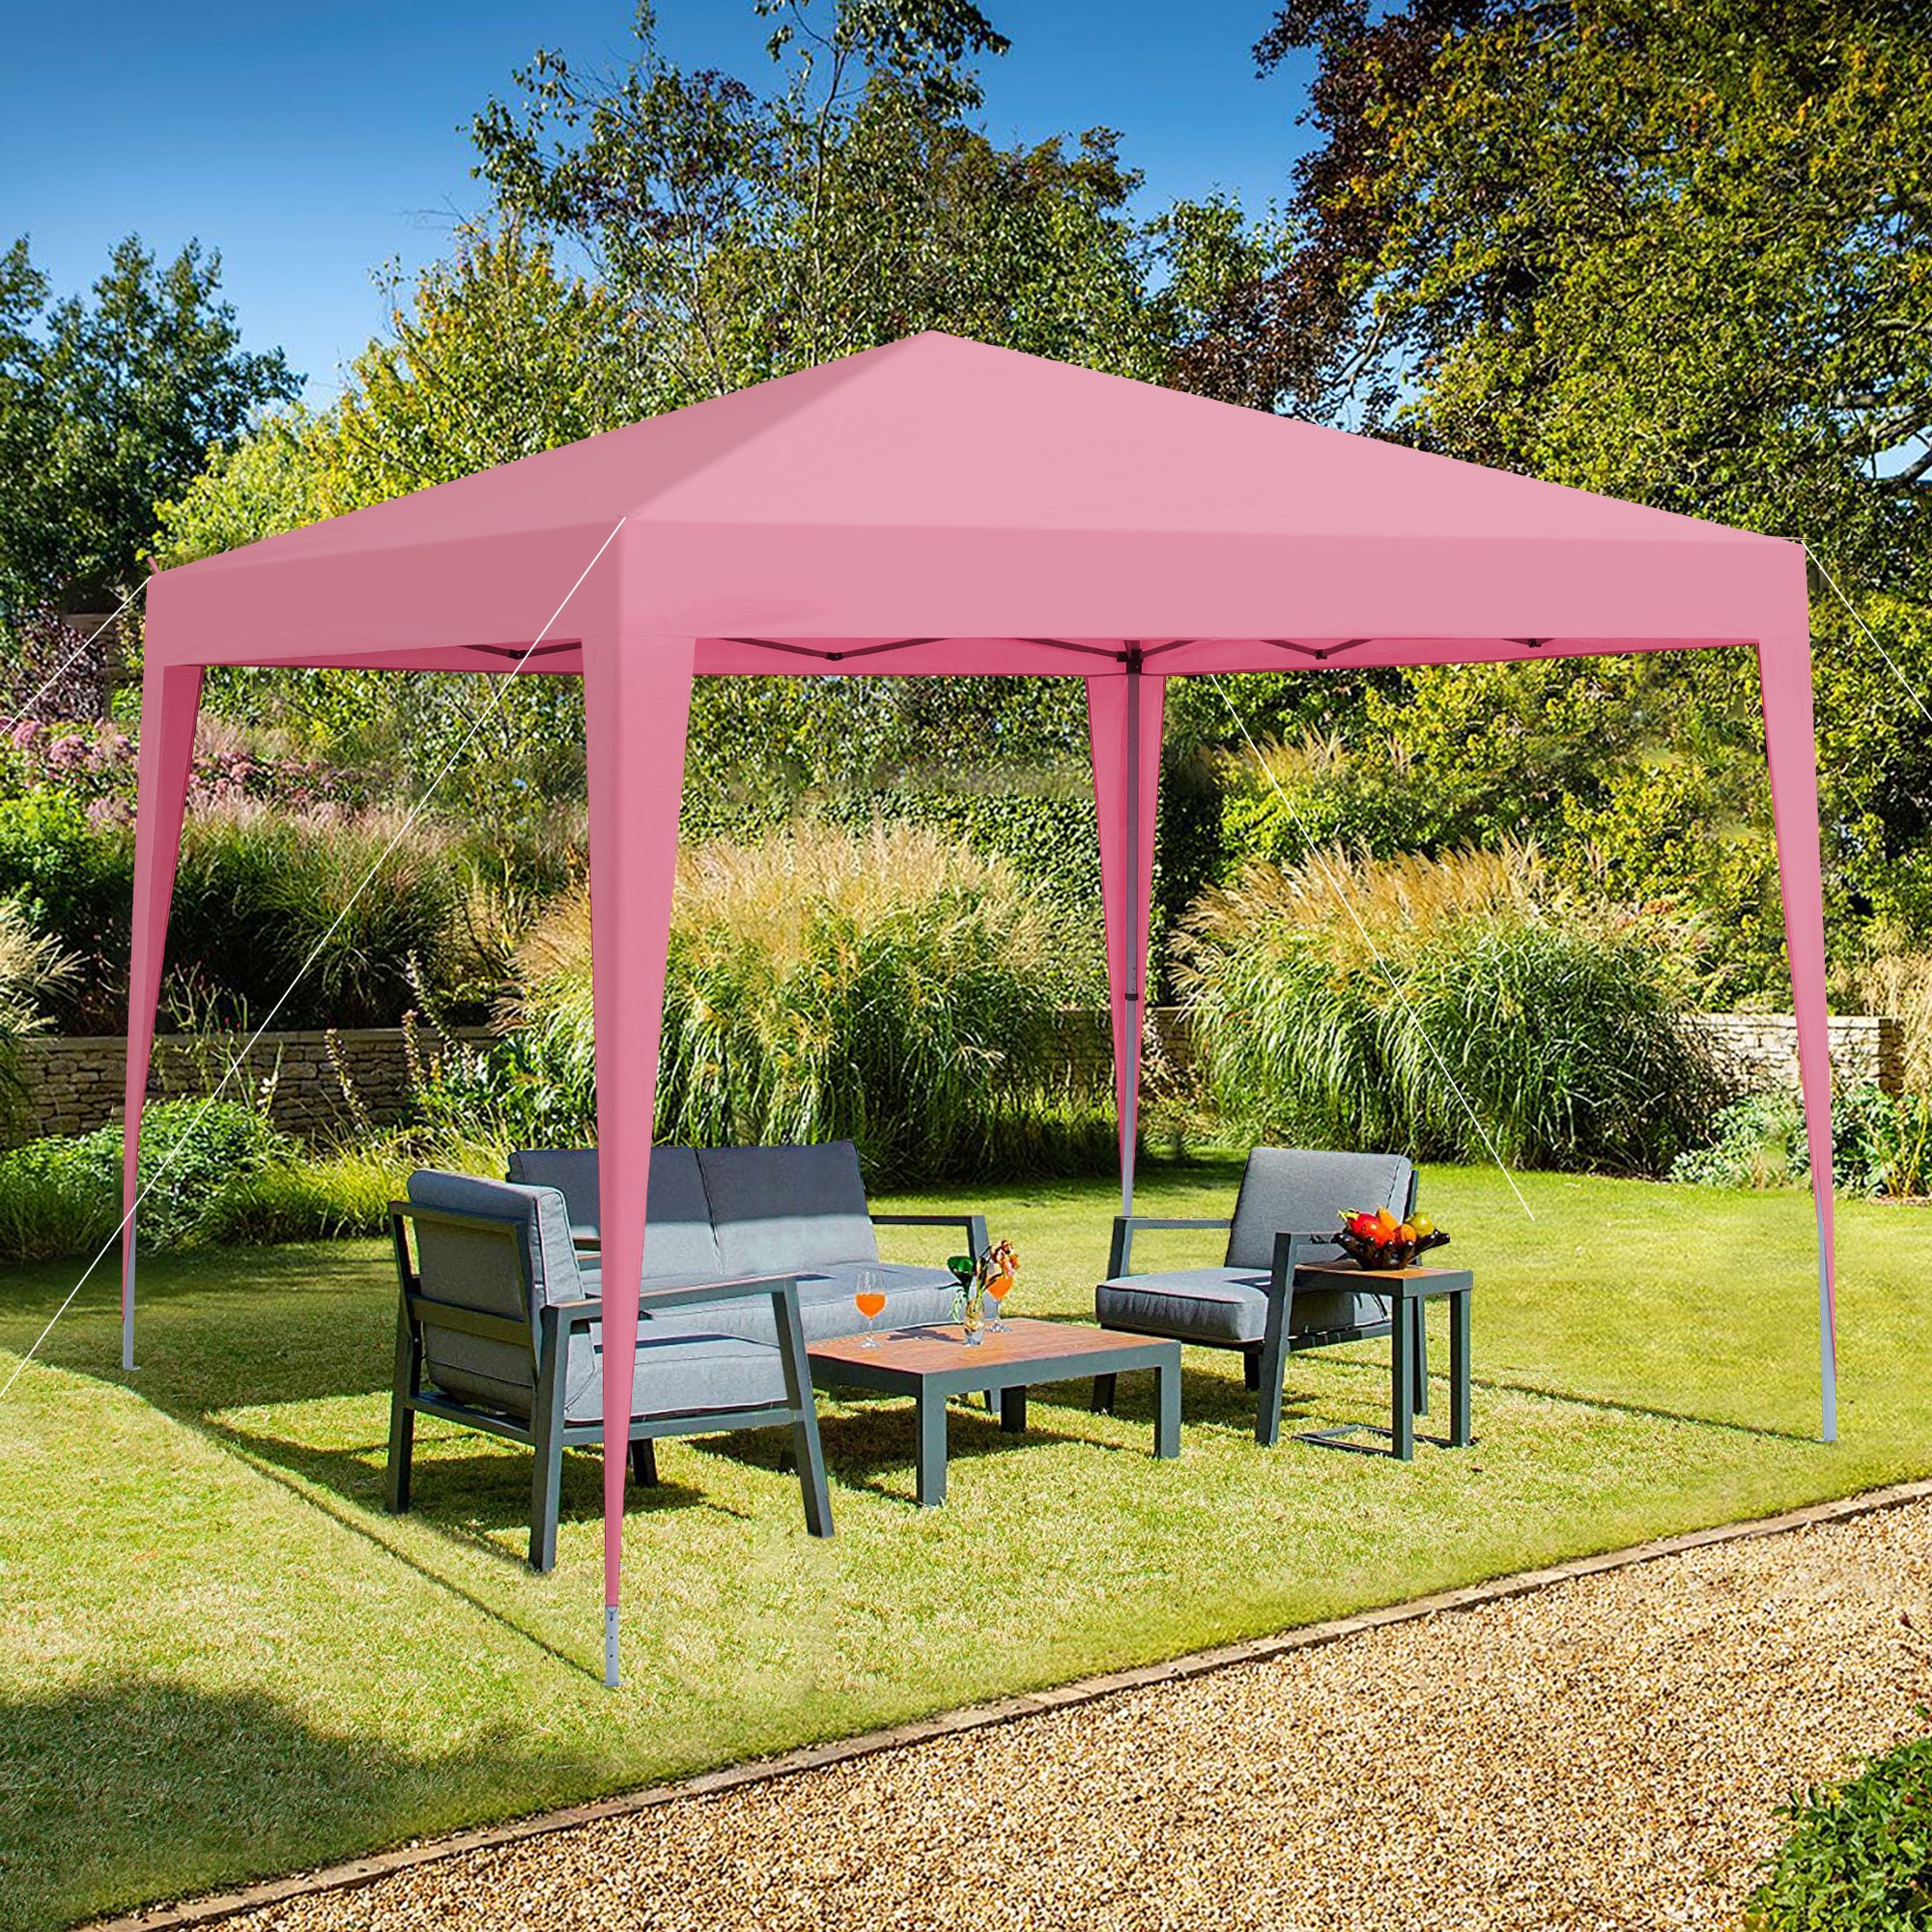 Outdoor-10x-10Ft-Pop-Up-Gazebo-Canopy-Tent-with-4pcs-Weight-sand-bag,with-Carry-Bag-Pink-Furniture/outdoor/Umbrellas-&-Sunshades